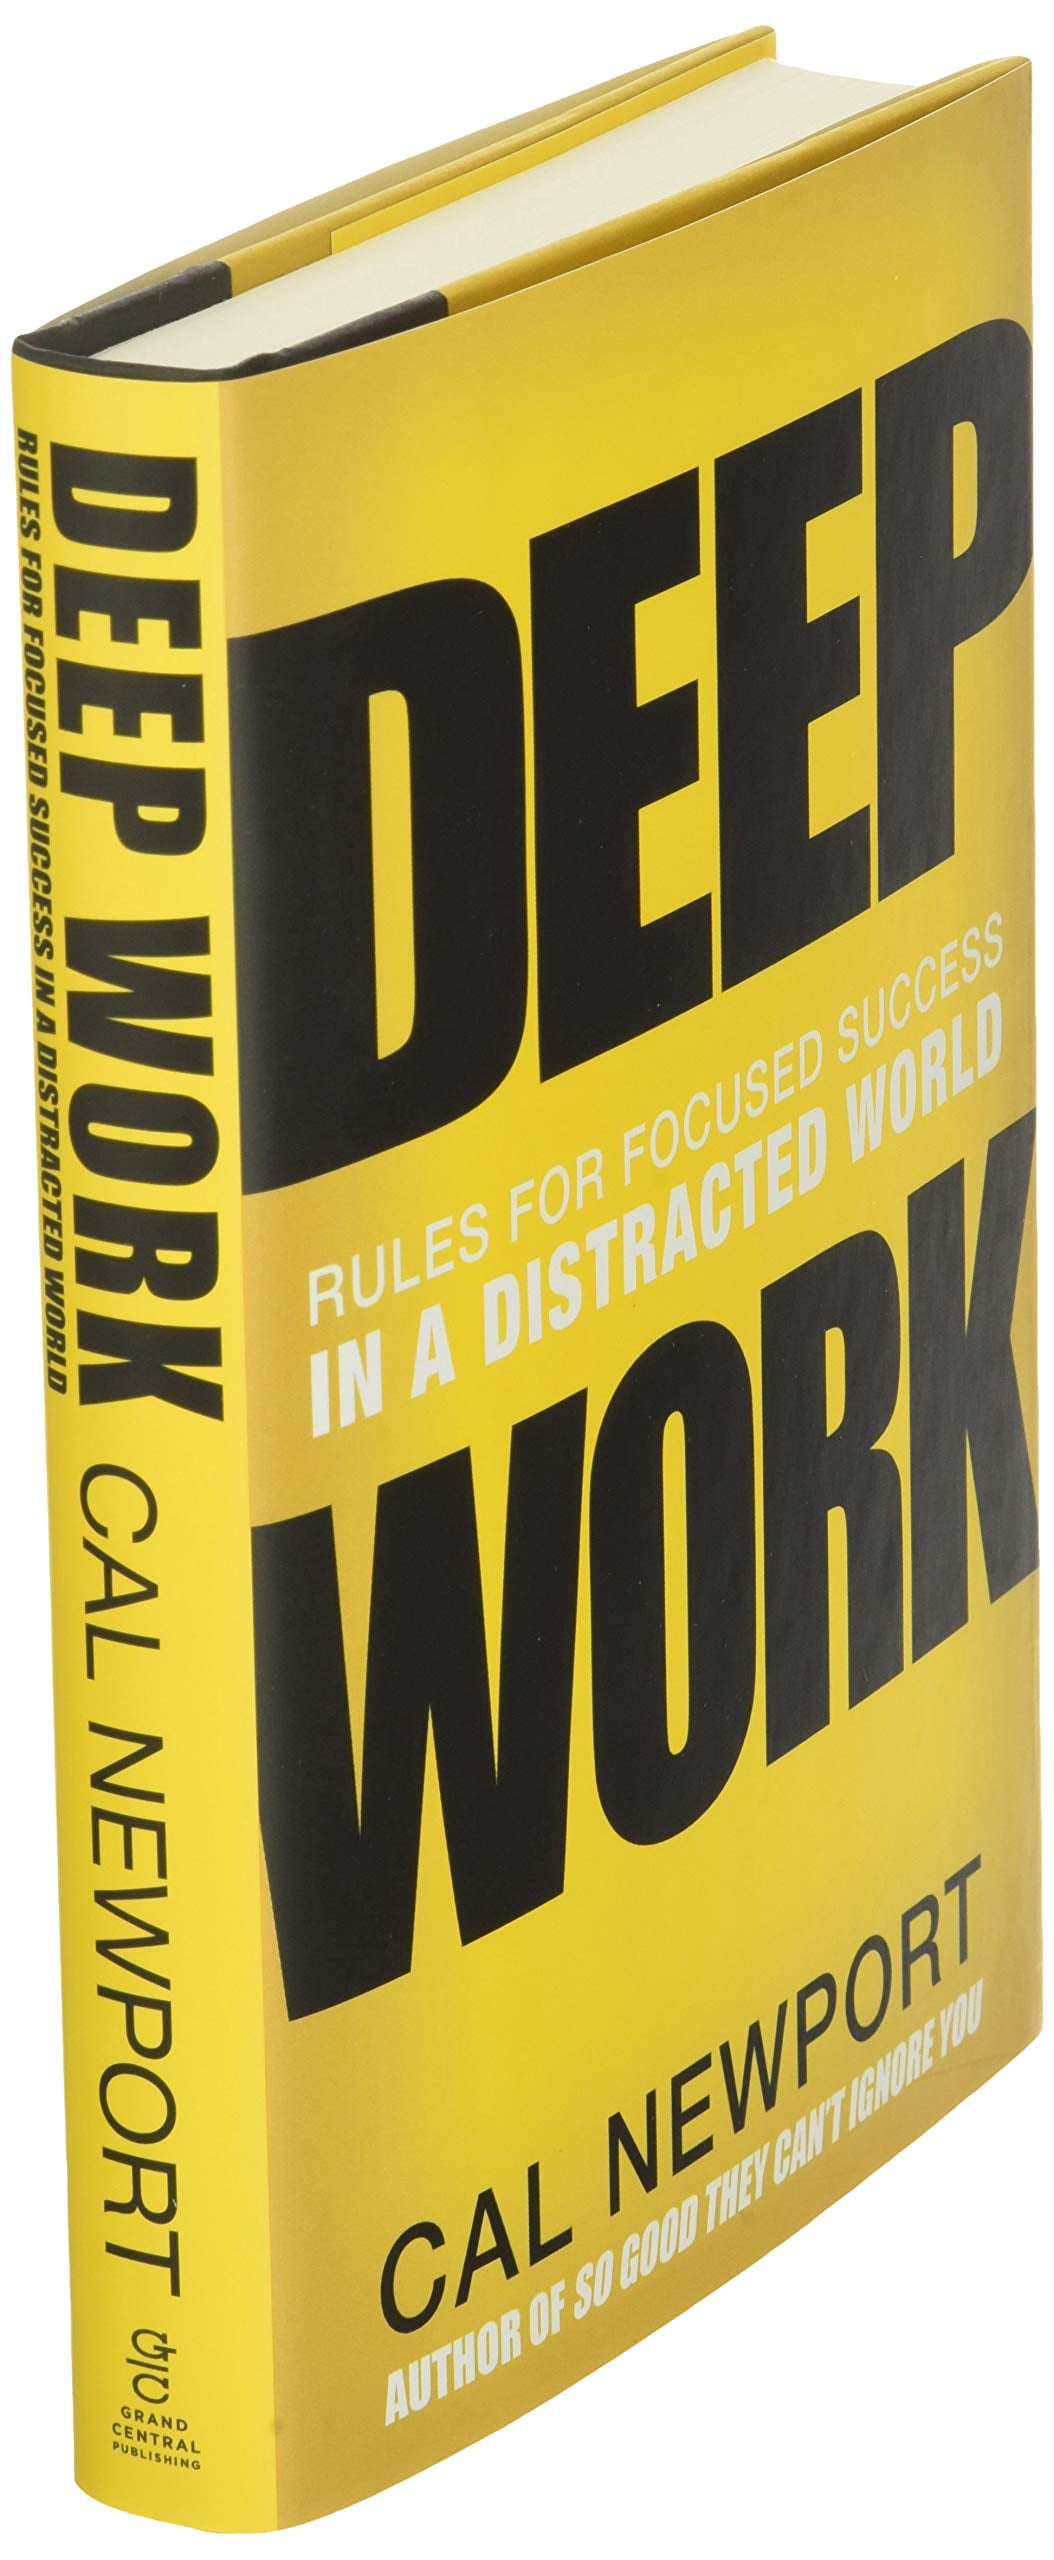 Deep Work: Methods For Staying Productive In A Distracted World - Slash